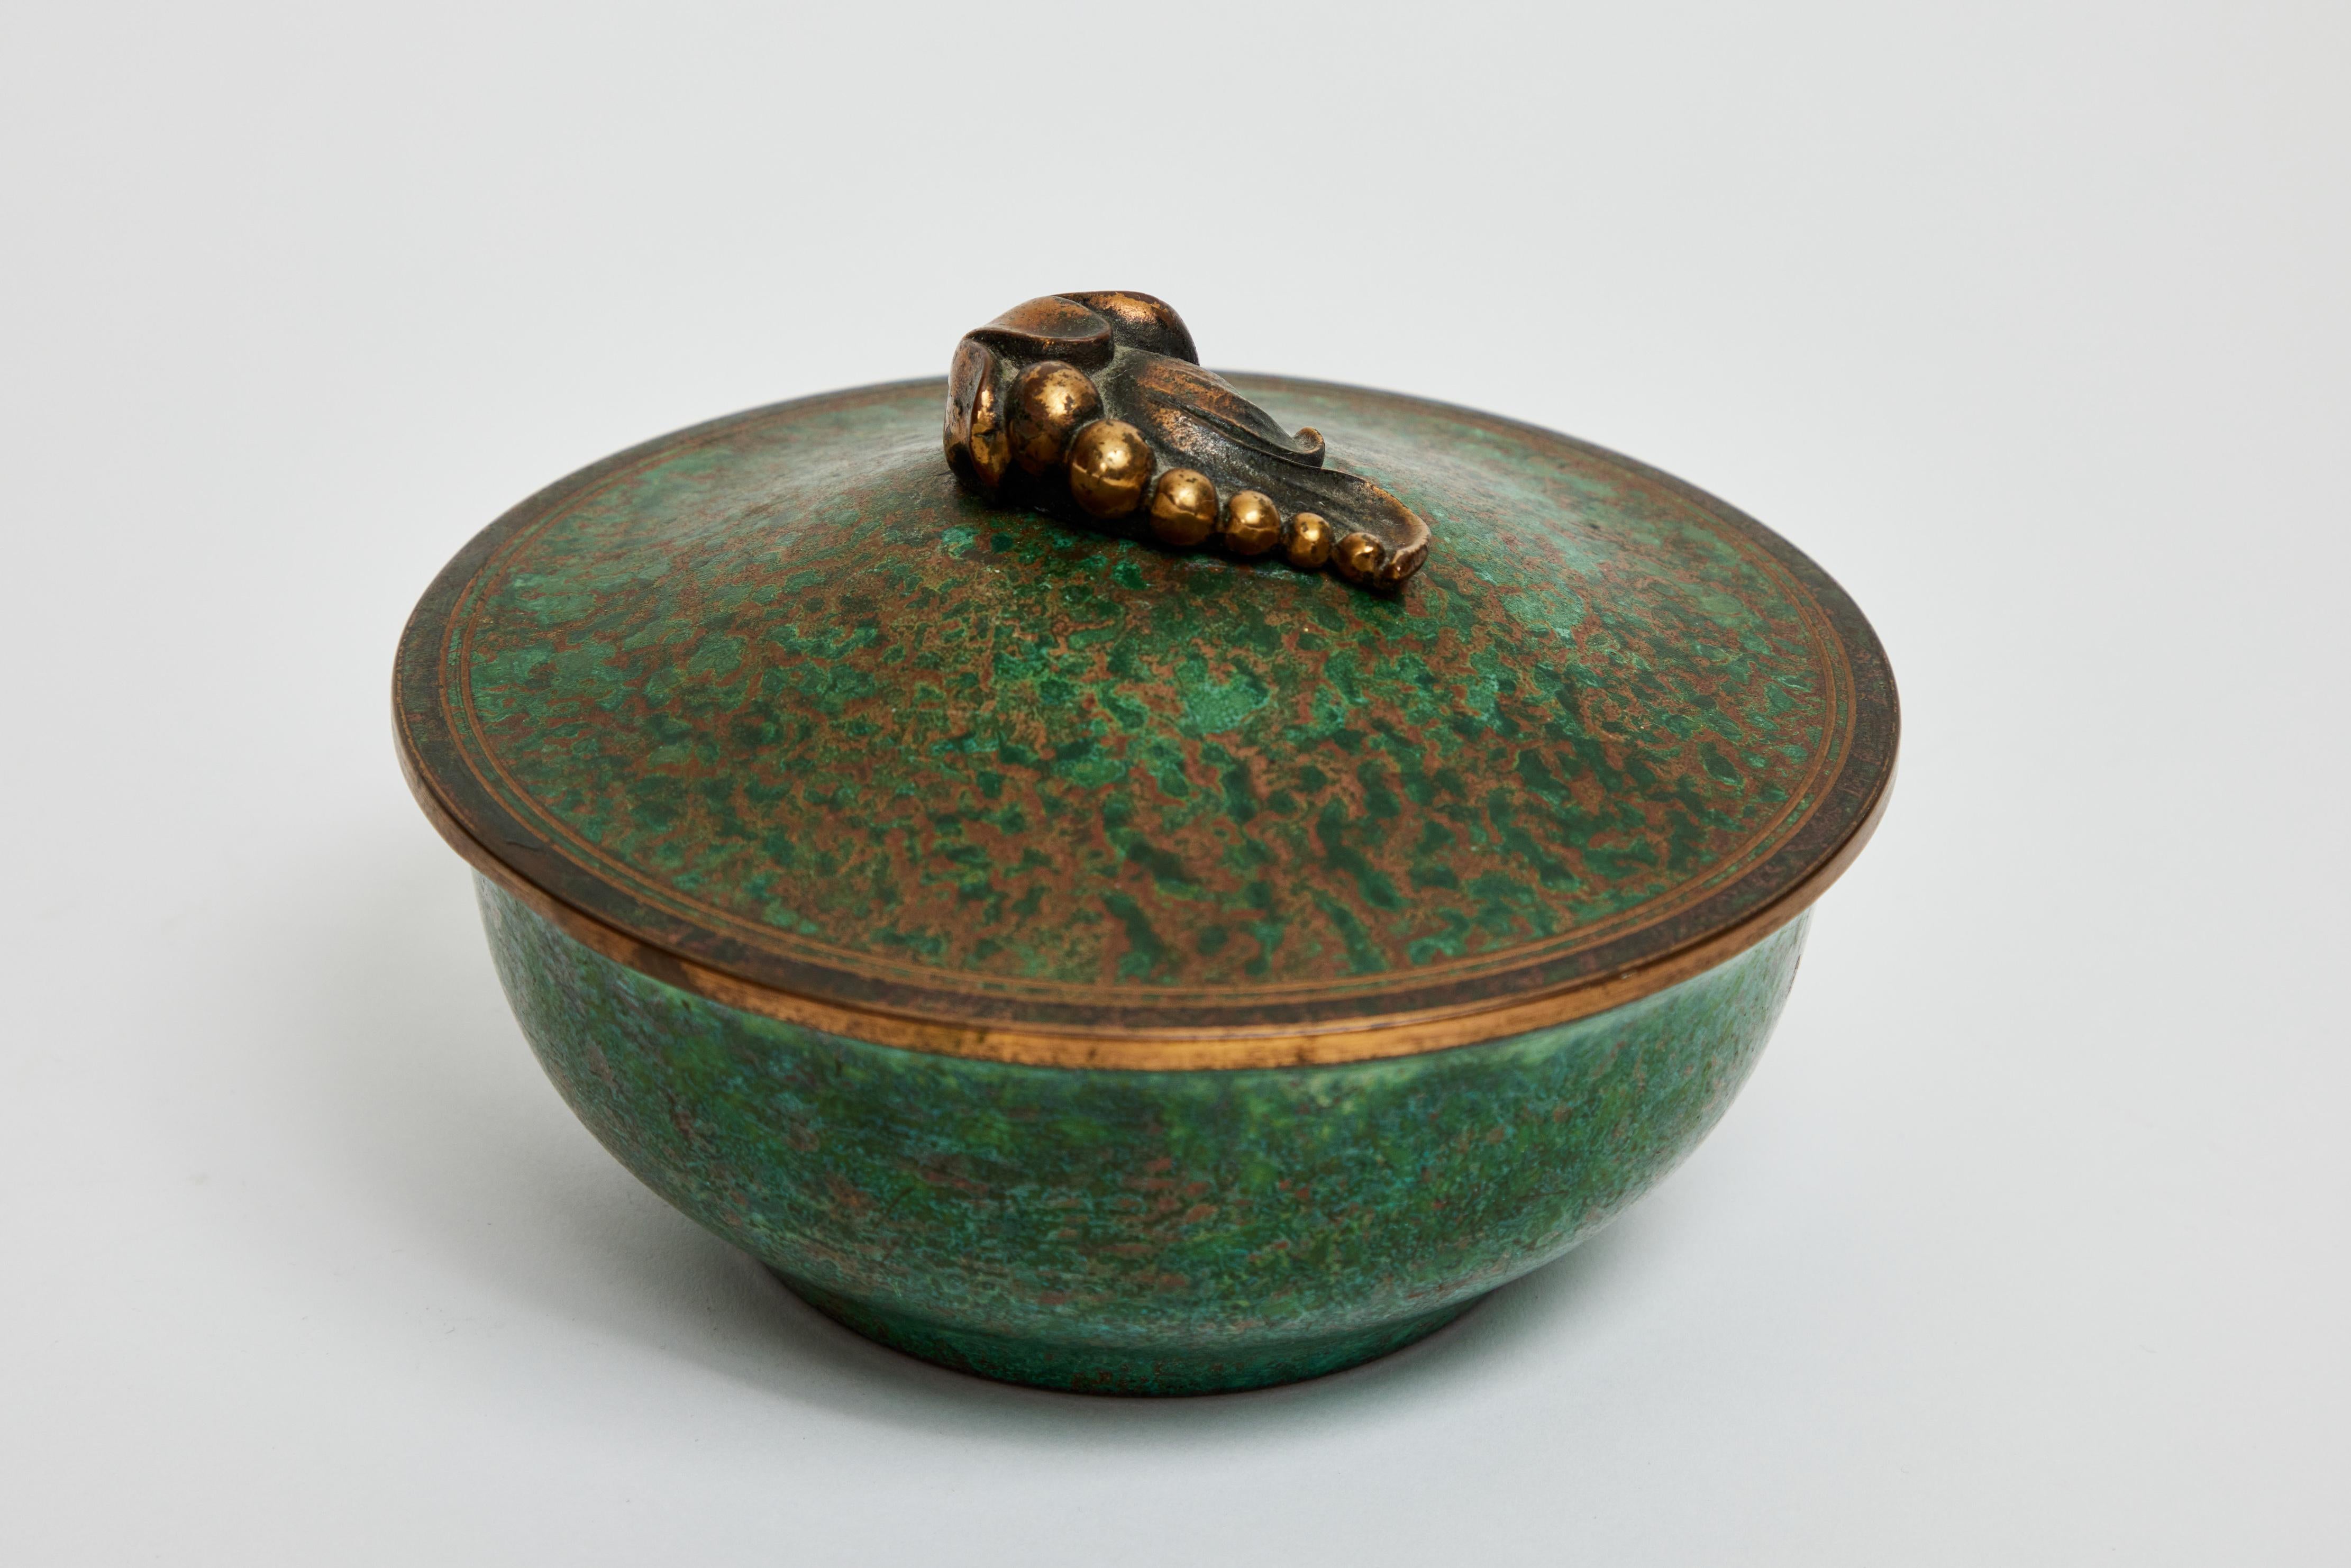 This striking American Arts & Crafts bronze covered dish is hand tooled and finished to an alluring rich verdigris patina, by Carl Sorensen.

Carl Sorensen is noted for his metalwares during the Arts & Crafts Movement of the early 1900's.